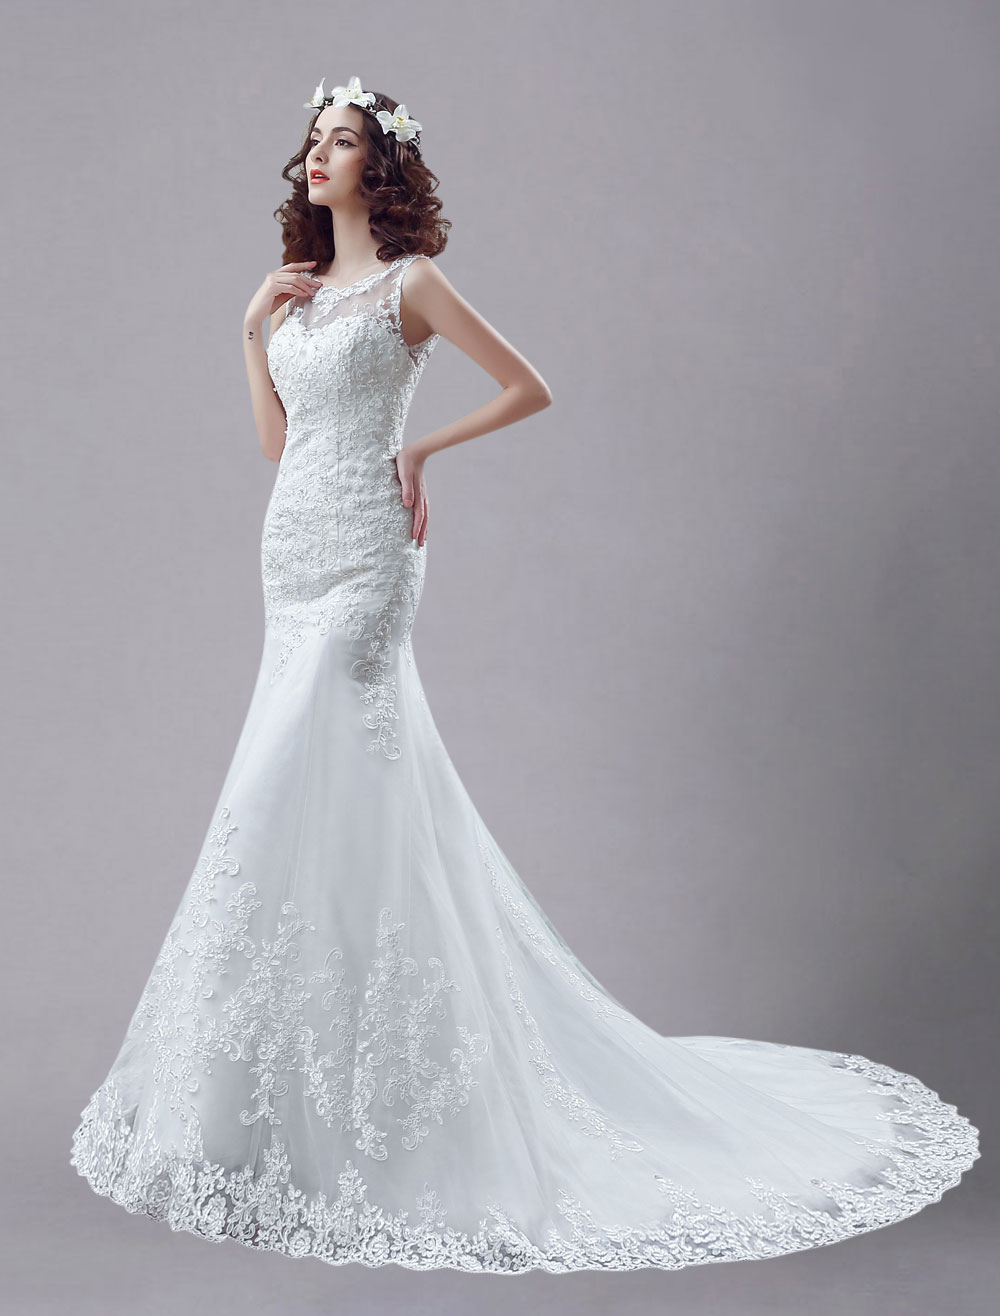 Top White Mermaid Wedding Dresses of the decade Learn more here 